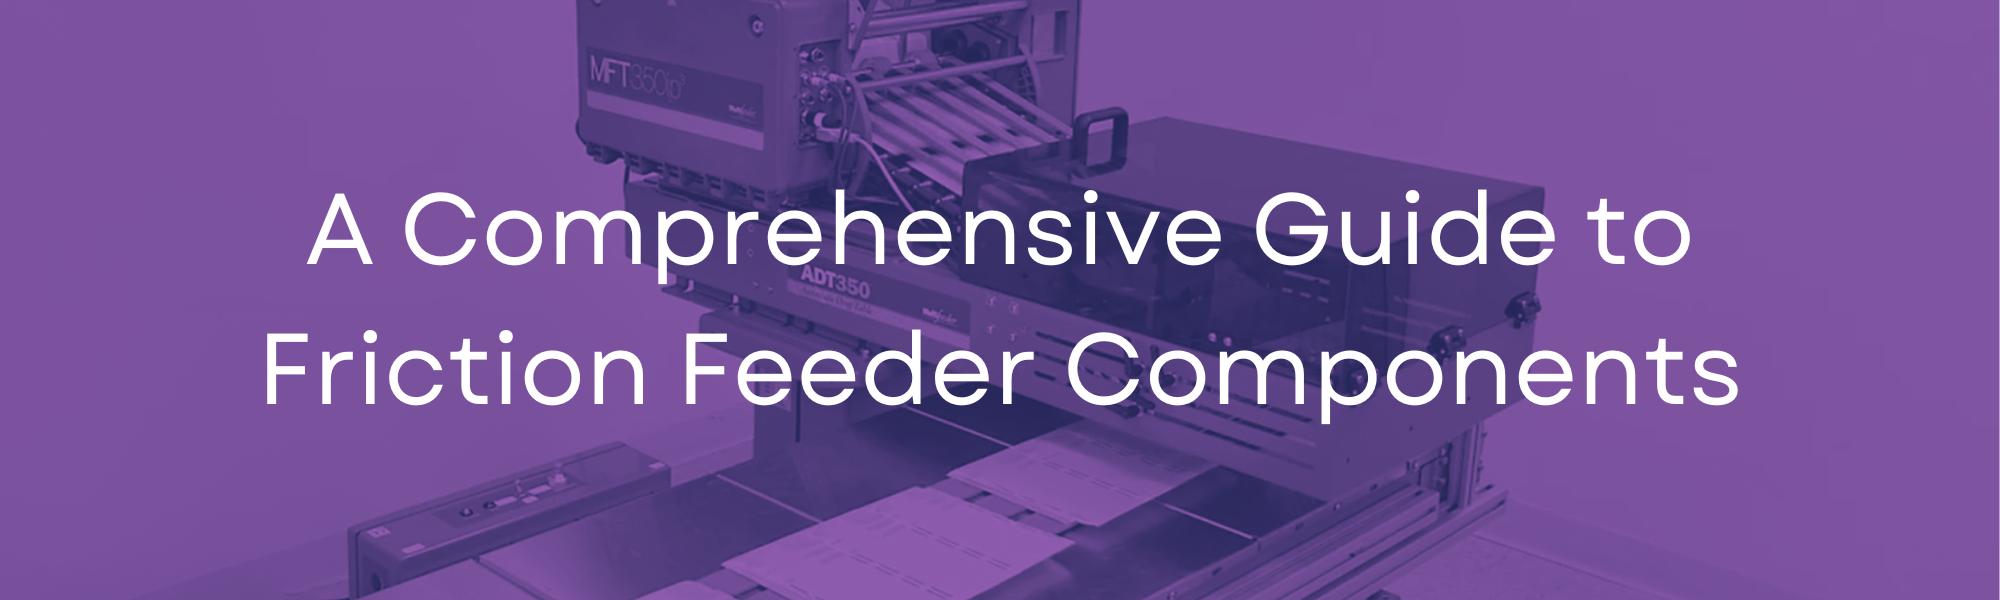 A Comprehensive Guide to Feeder Components (1)